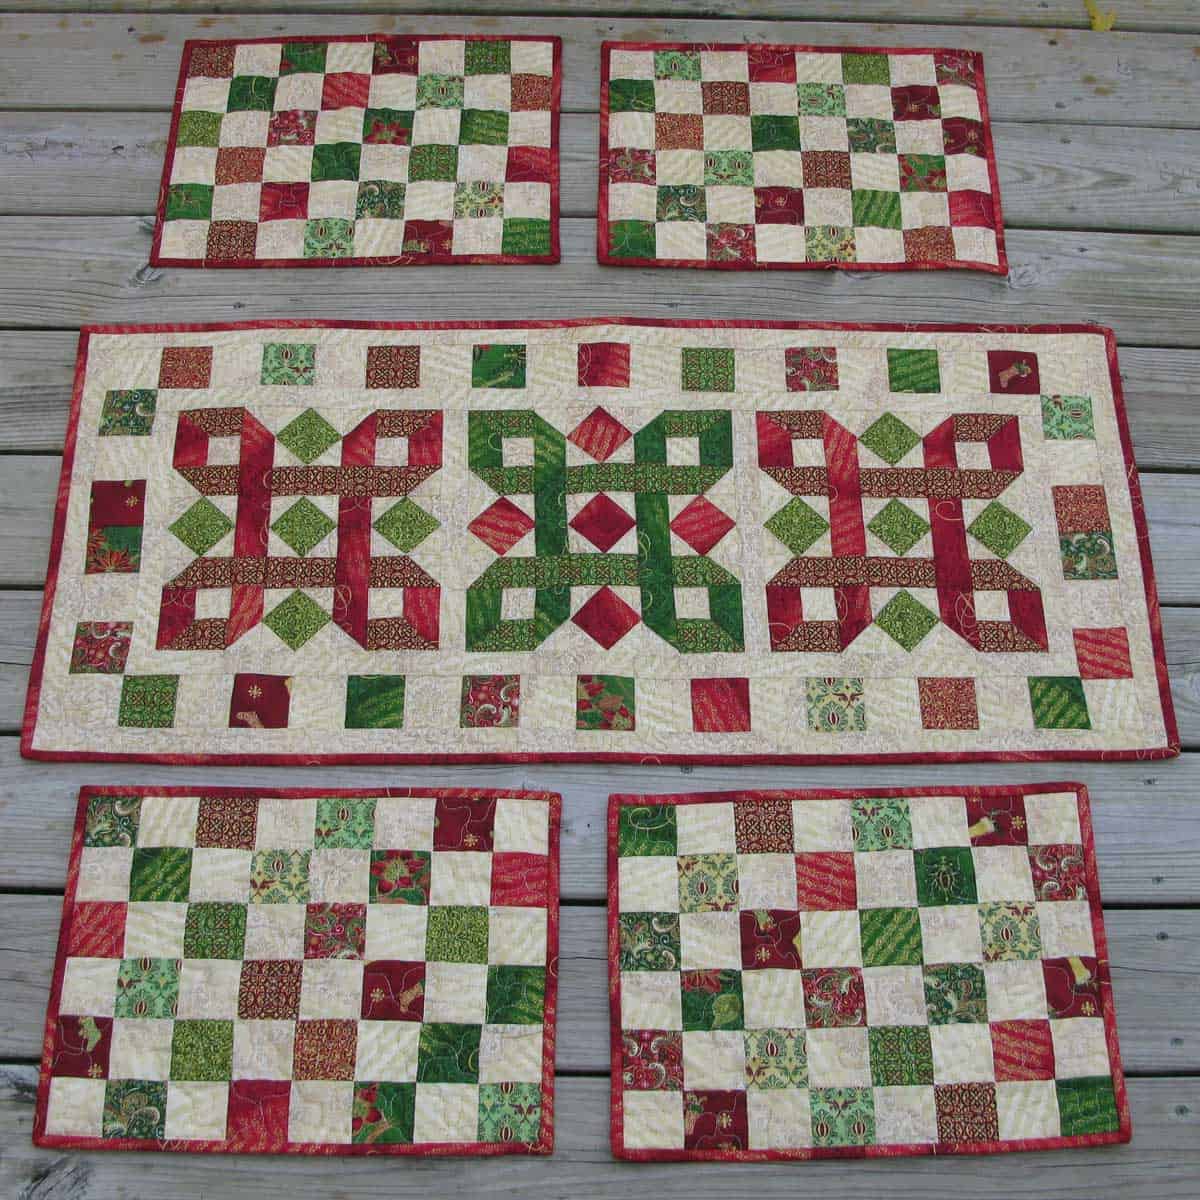 Tis the Season tablerunner and placemats